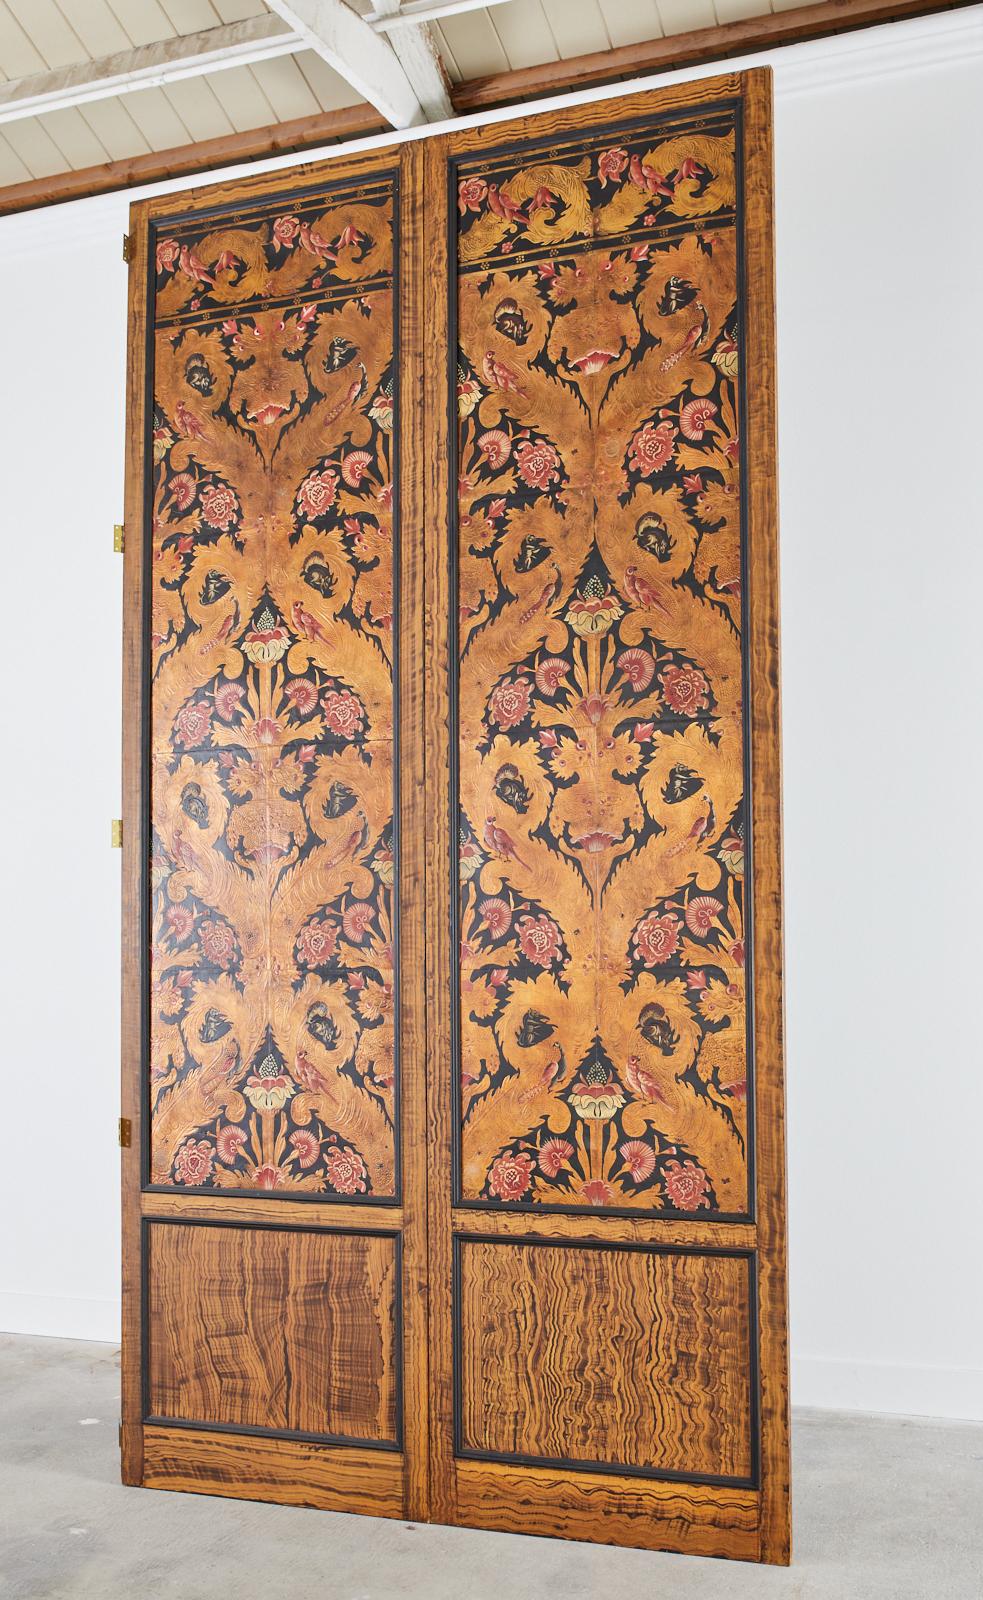 Extraordinary pair of massive art nouveau leather inset panel screens featuring flora and fauna embossed and painted designs. The leather panels are decorated with birds, squirrels, and mythical beasts amid gilt foliage and red floral blooms. The